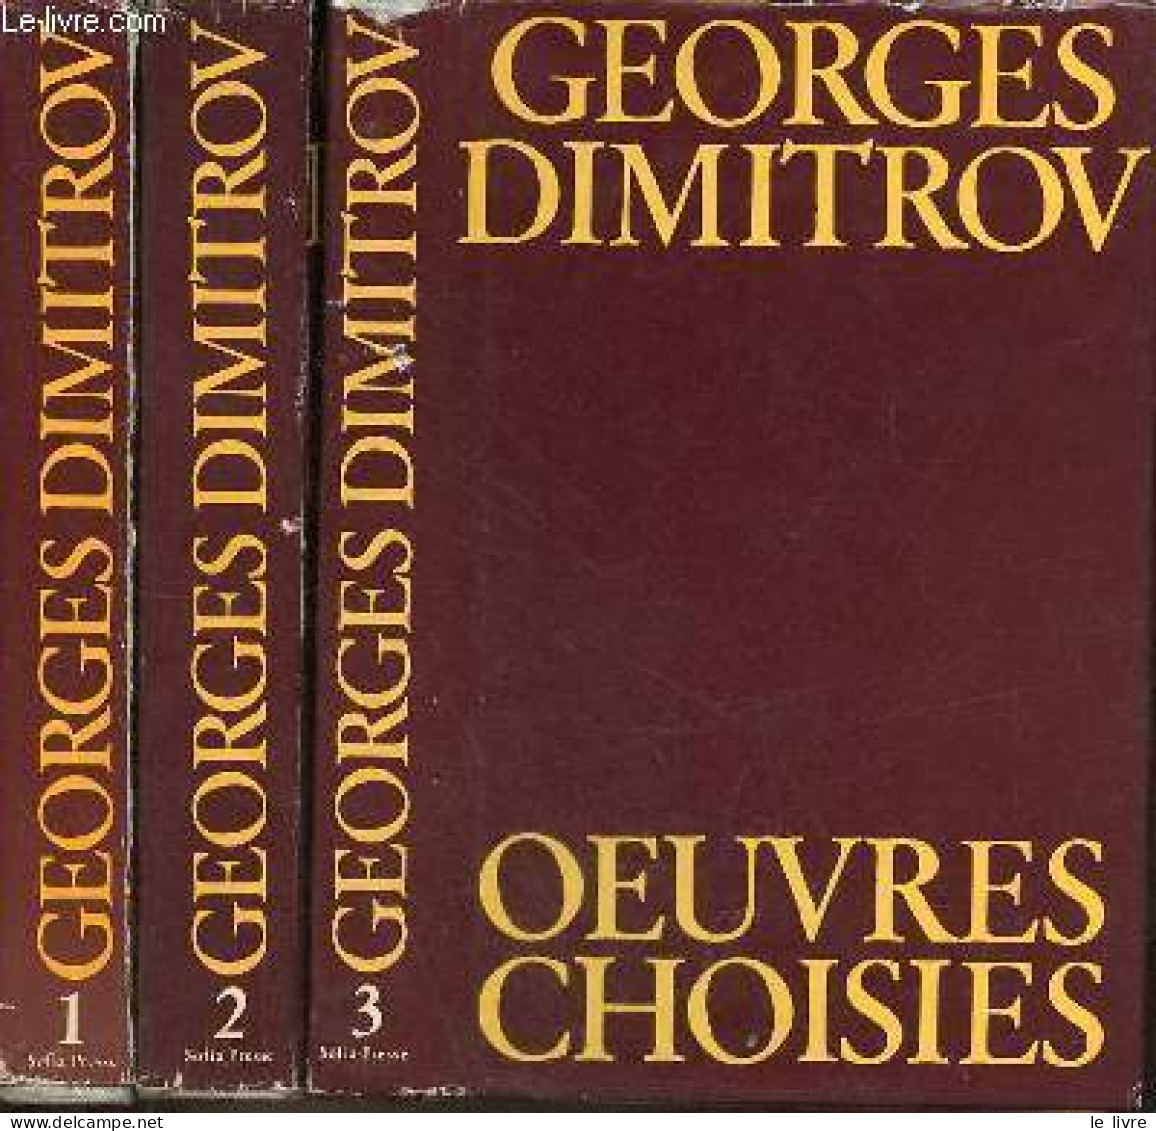 Oeuvres Choisies - Tome 1+2+3 (3 Volumes). - Dimitrov Georges - 1978 - Slav Languages